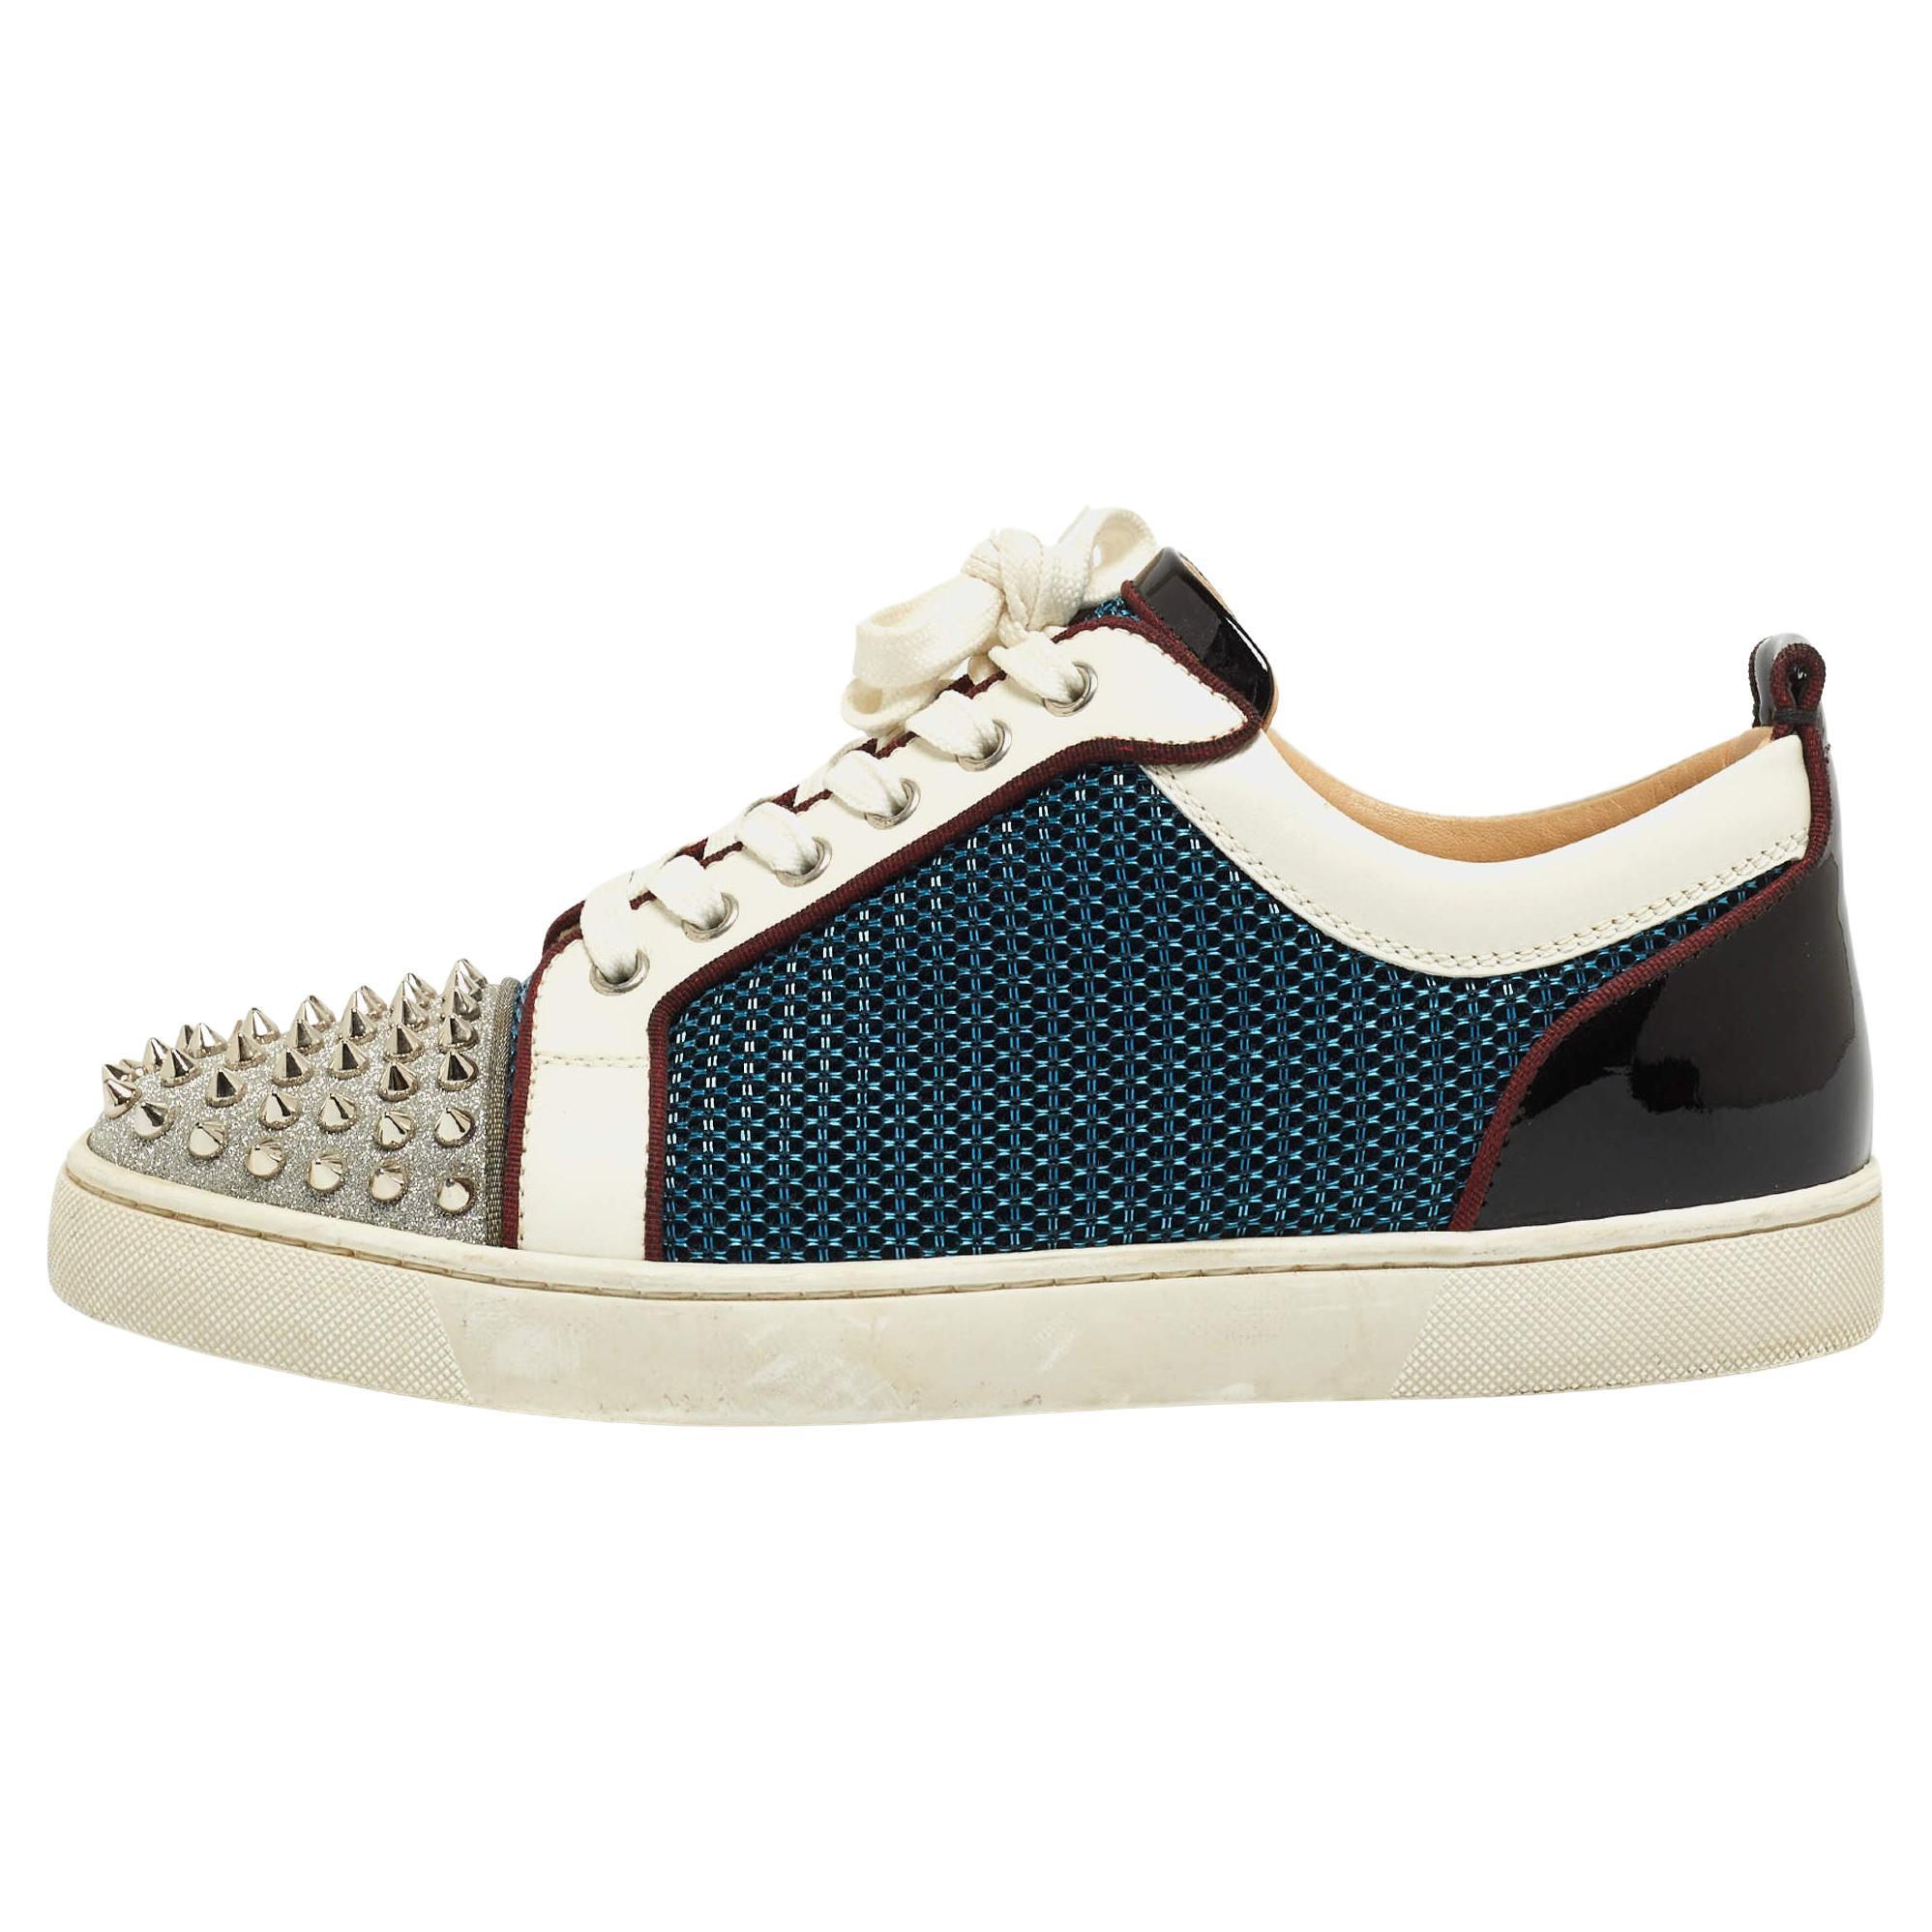 Christian Louboutin Multicolor Mesh and Leather Louis Junior Spikes Sneakers Siz